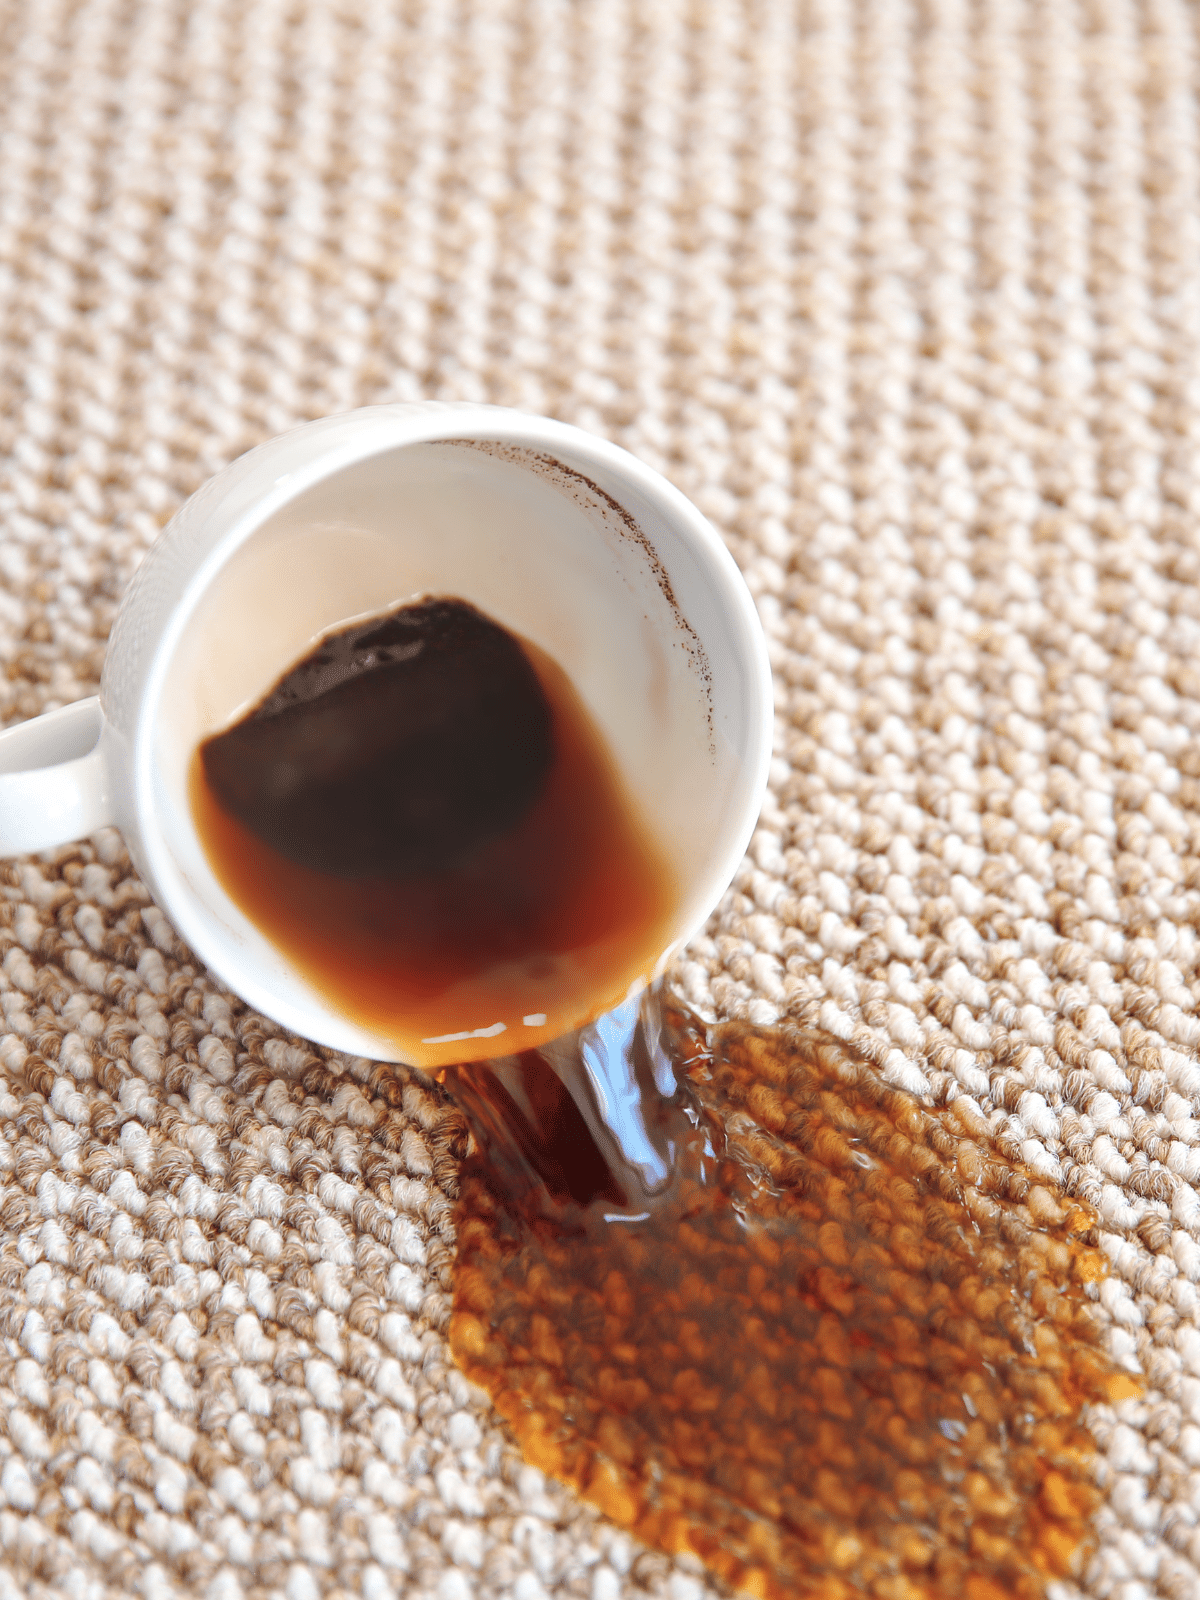 Coffee spilled on a brown carpet.